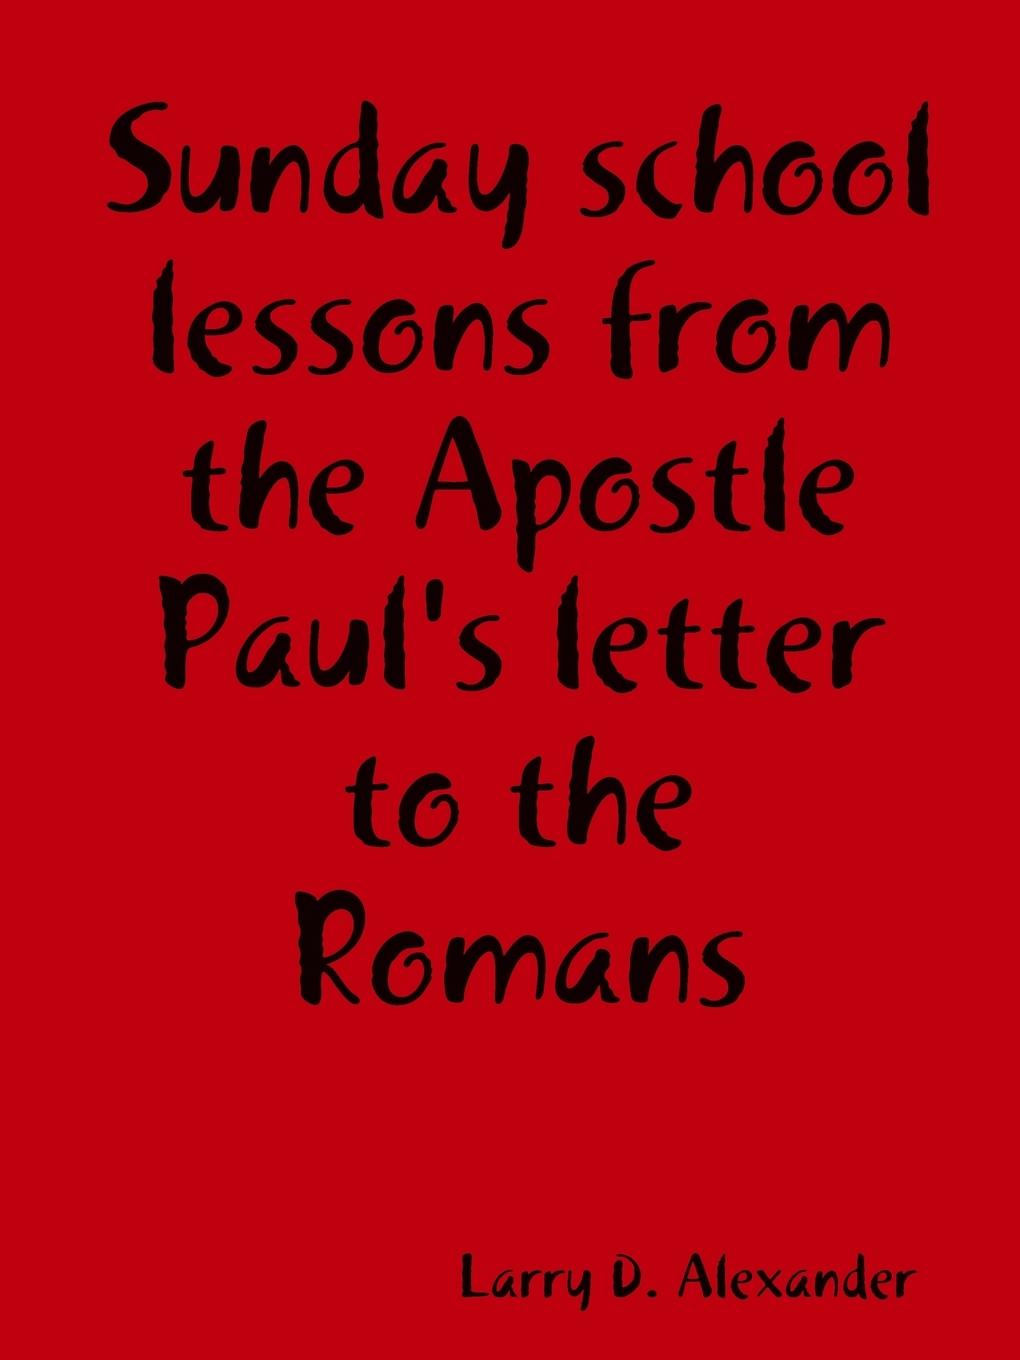 Sunday school lessons from the Apostle Paul s letter to the Romans - Alexander, Larry D.